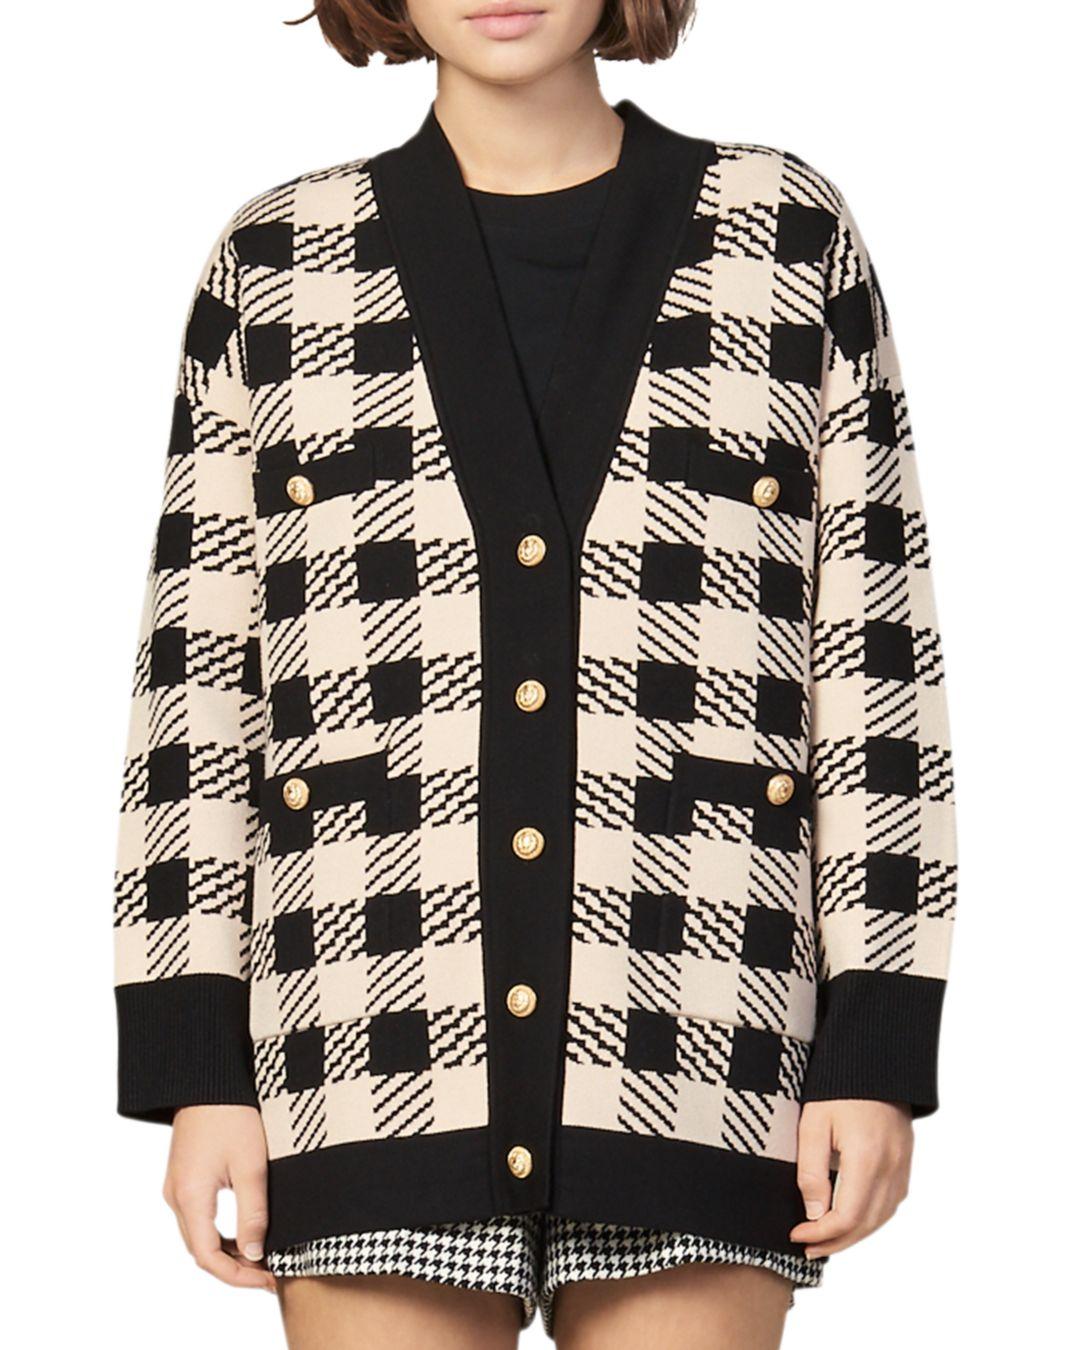 Sandro Synthetic Jisou Check Cardigan in Beige (Natural) - Lyst